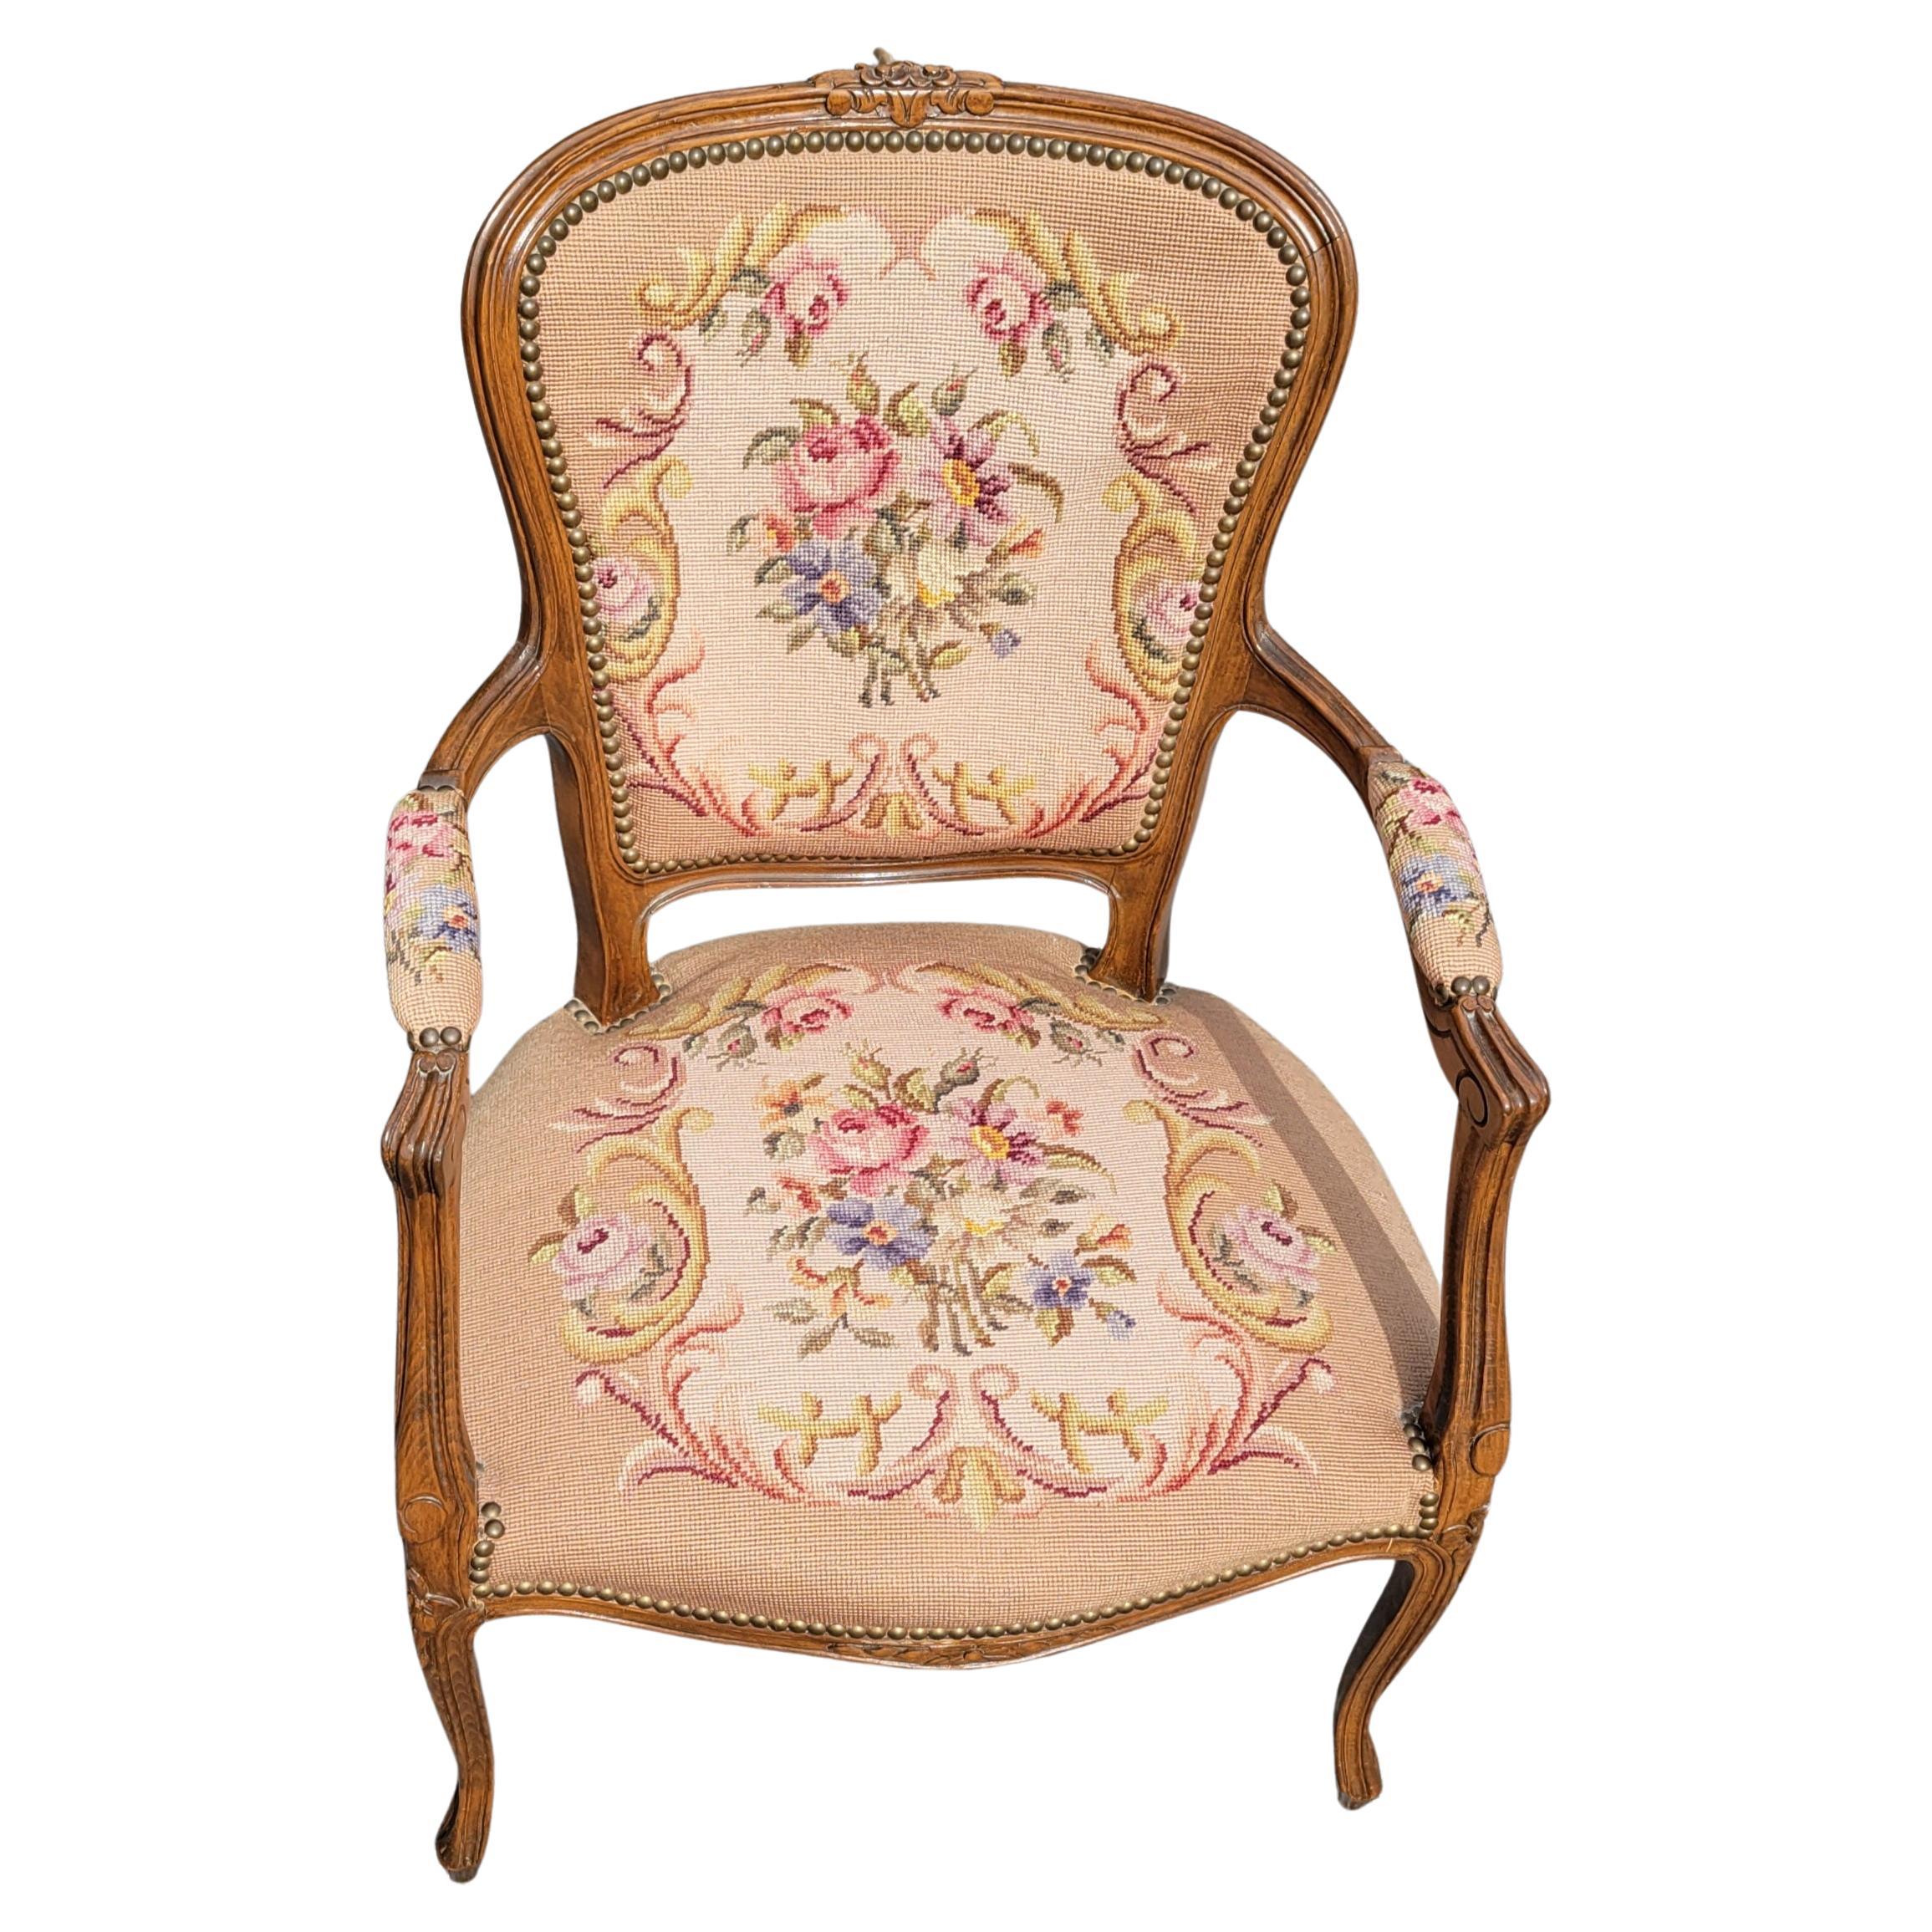 French walnut needlework armchair in the Louis XV style and carved with a floral crest. The needlework seat and back are bordered with brass studs. Measures 23